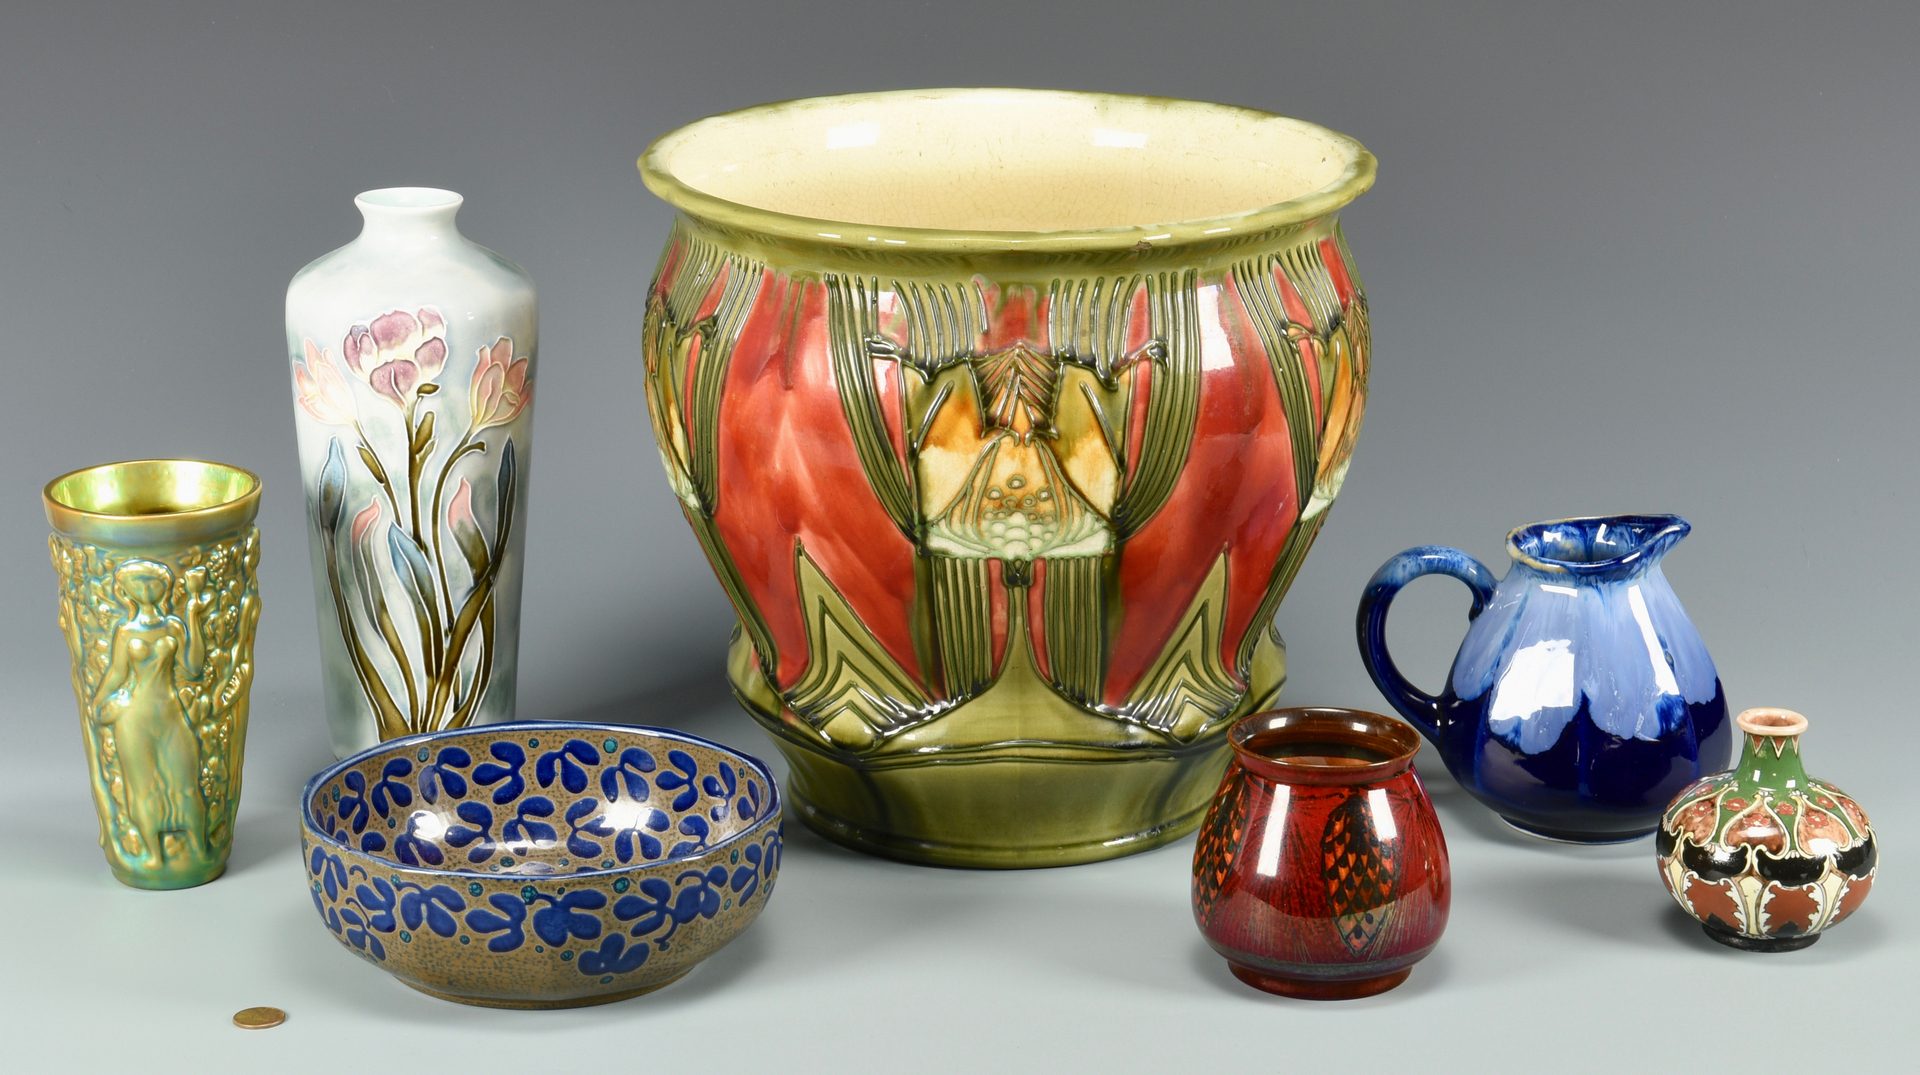 Lot 513: Group of 7 European Art Pottery Items